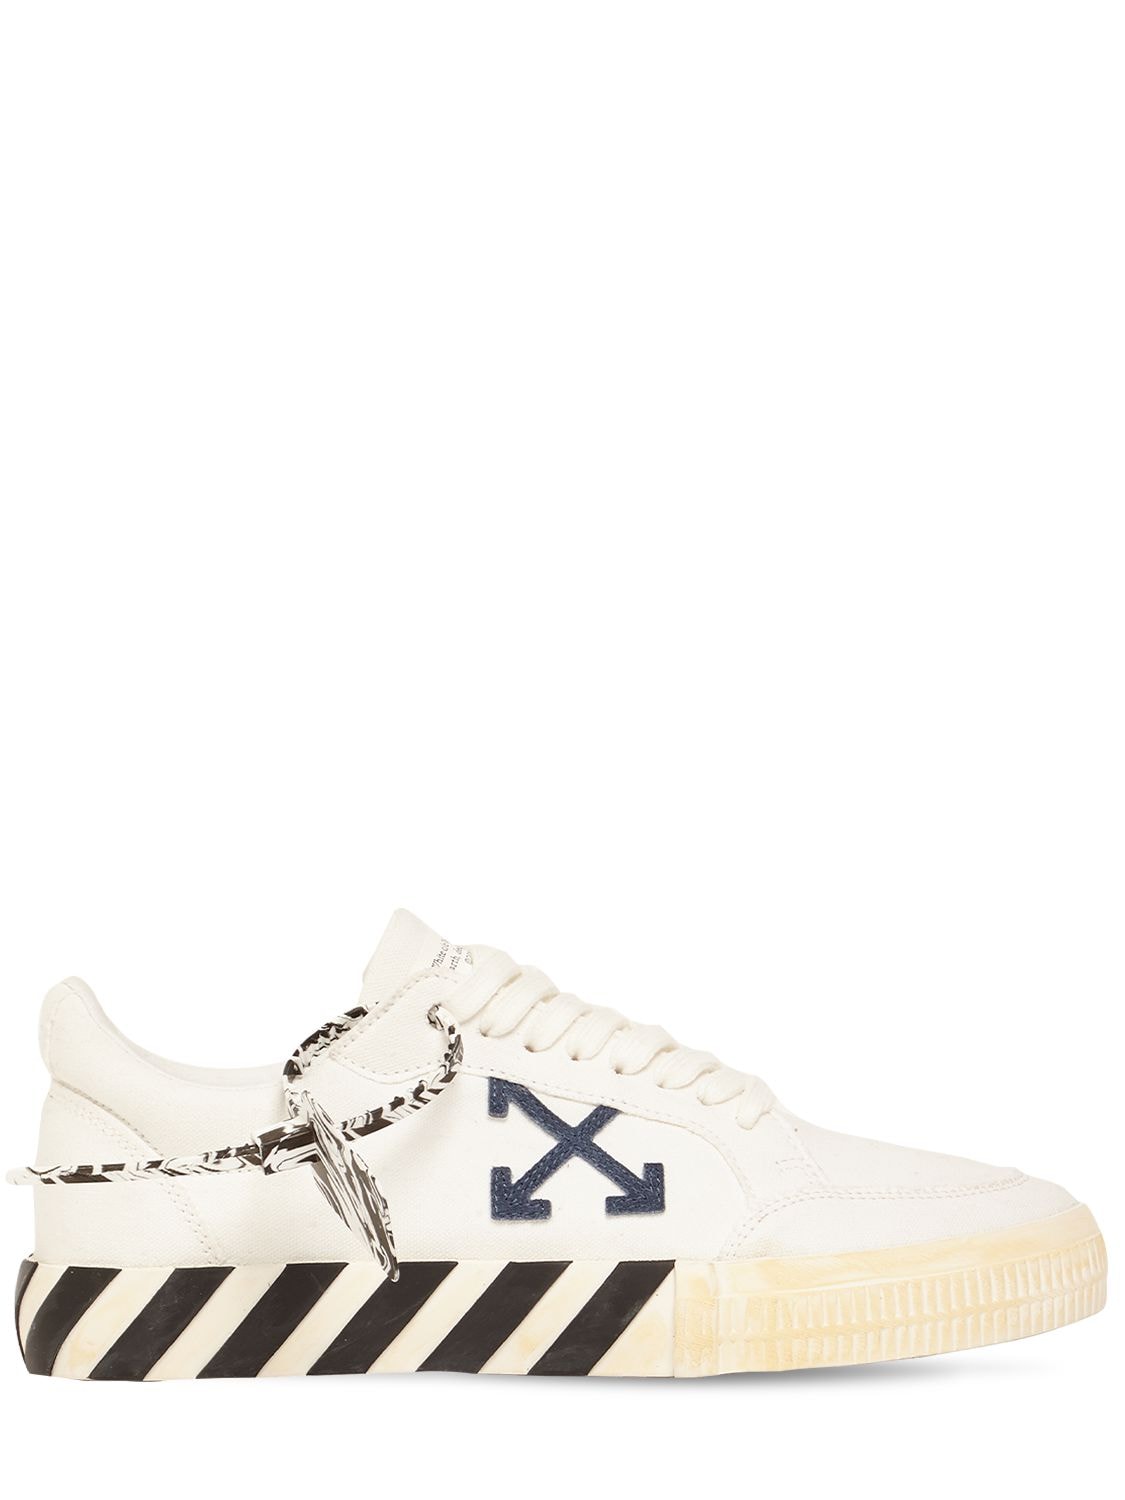 OFF-WHITE VULCANIZED CANVAS LOW SNEAKERS,74IJSY002-MDE0NG2